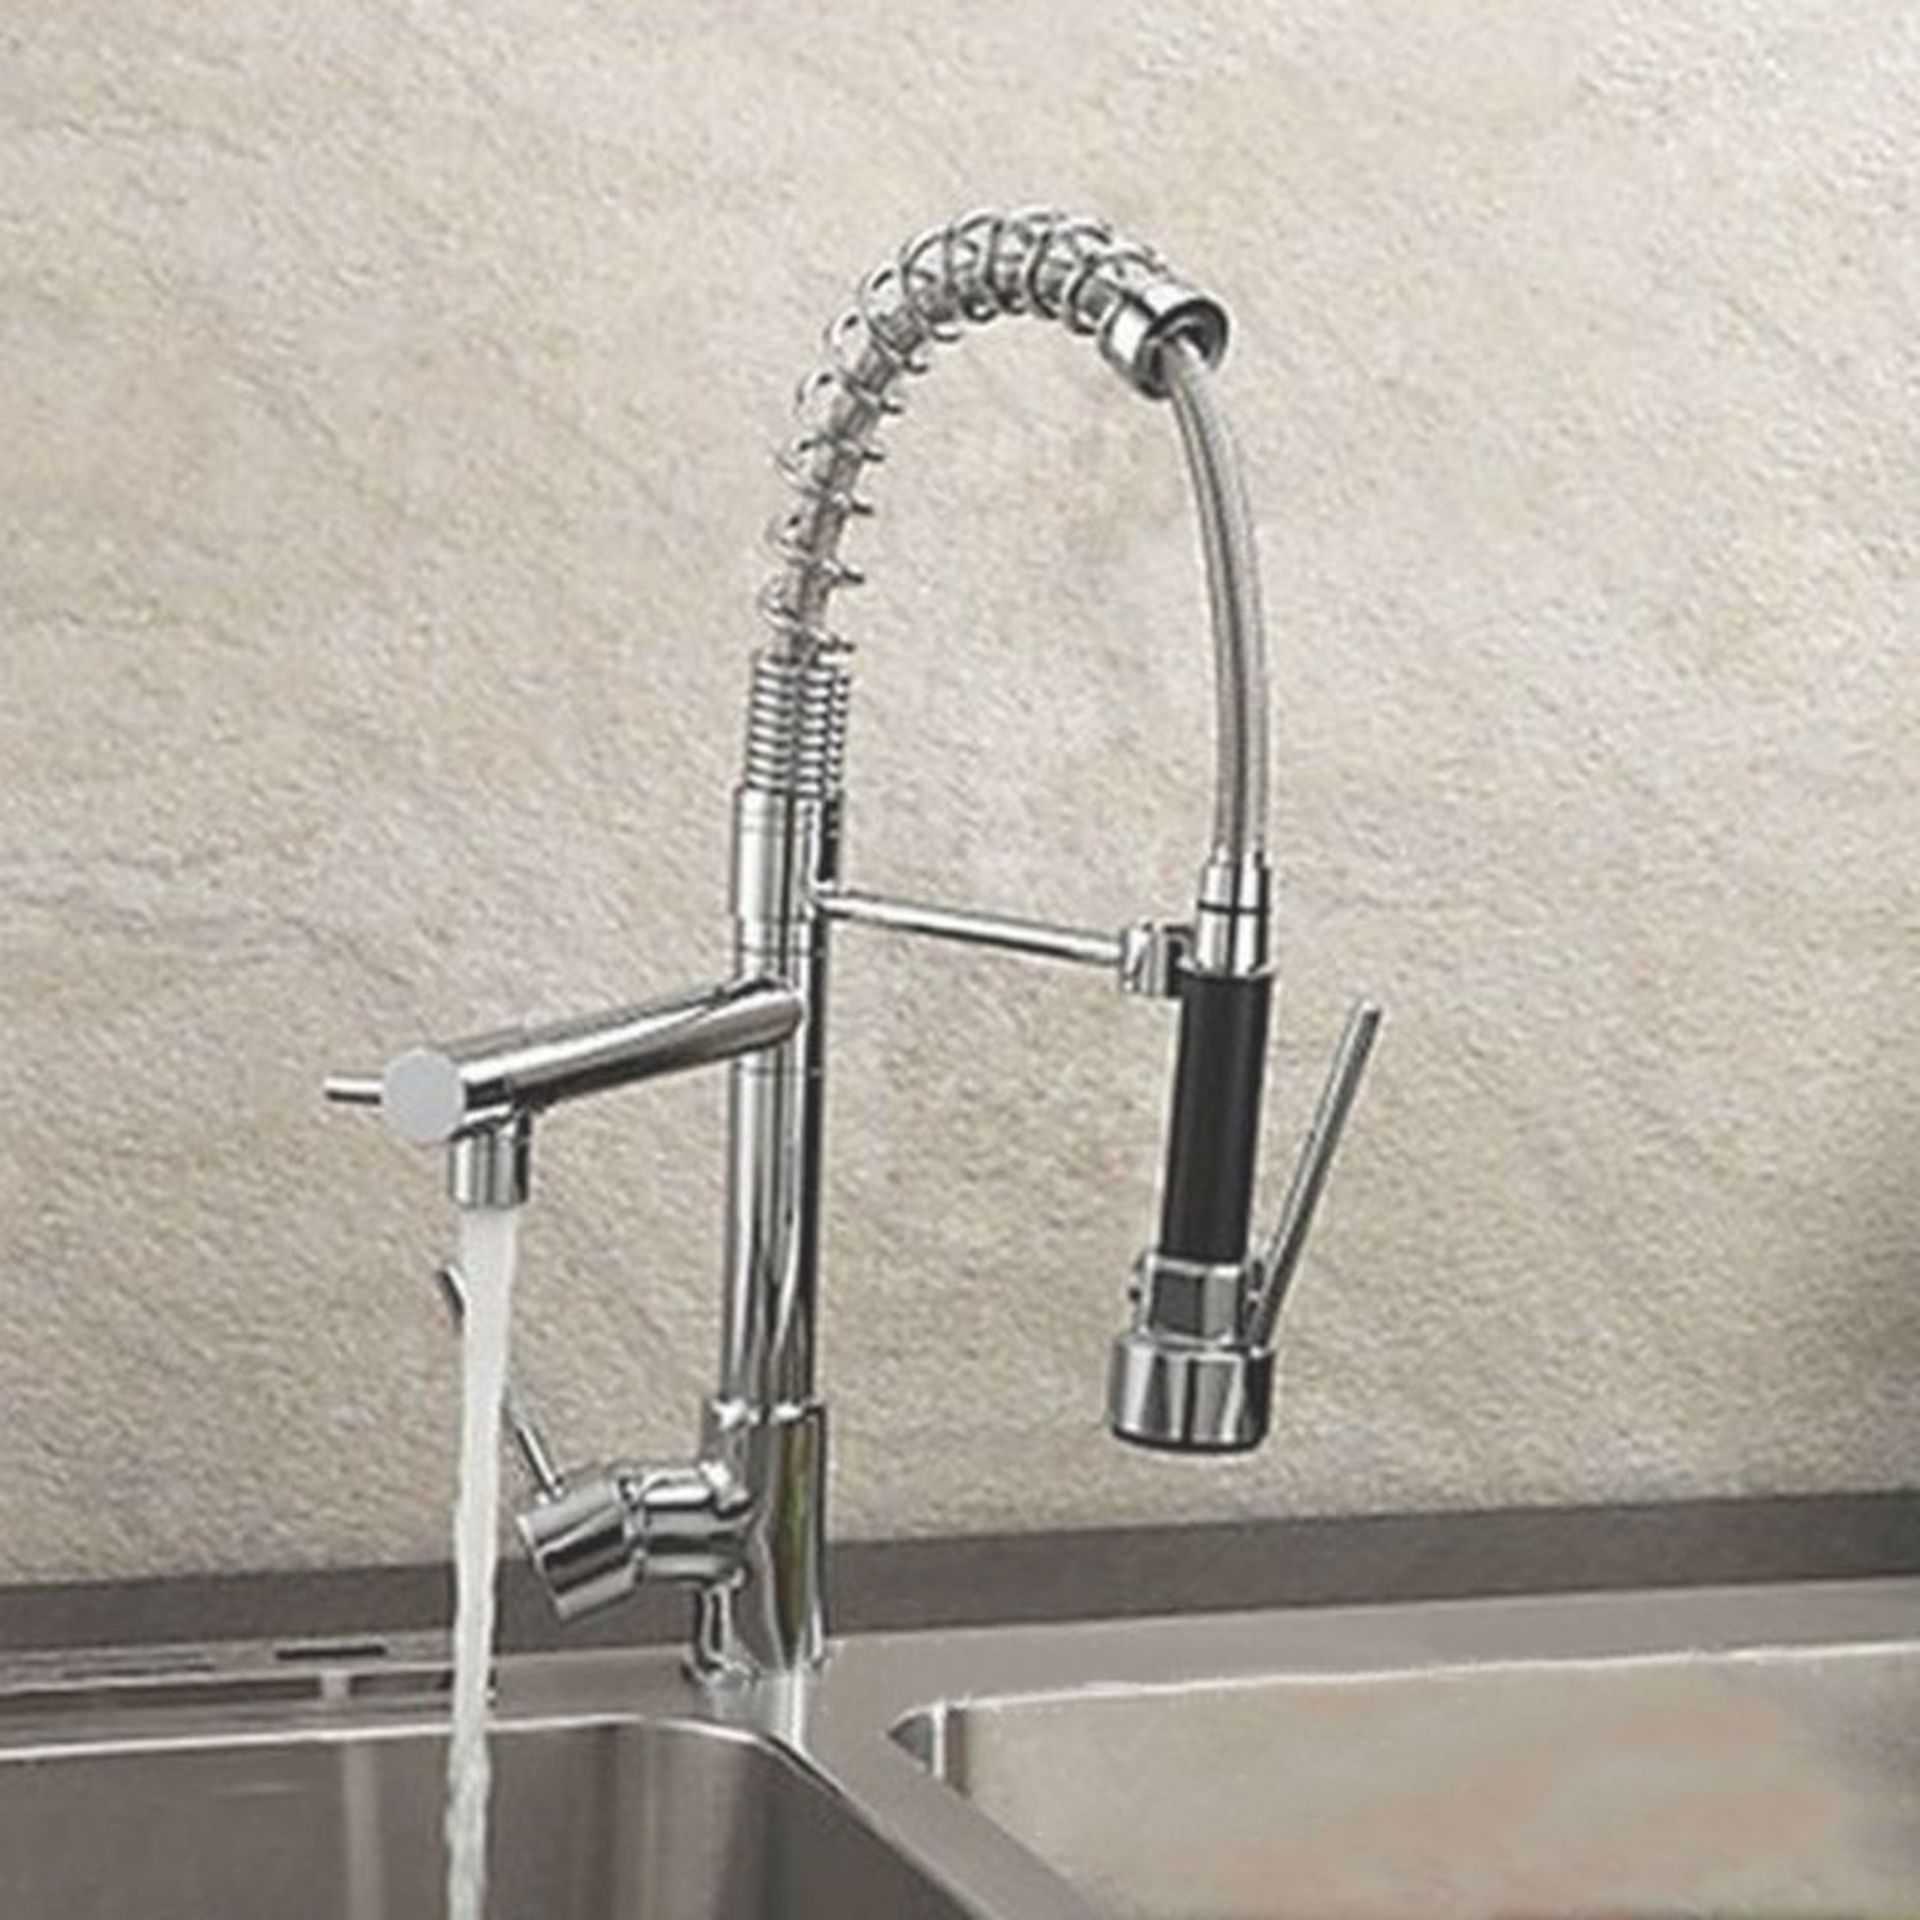 (MC220) Bentley Modern Monobloc Chrome Brass Pull Out Spray Mixer Tap. RRP £349.99. This tap is from